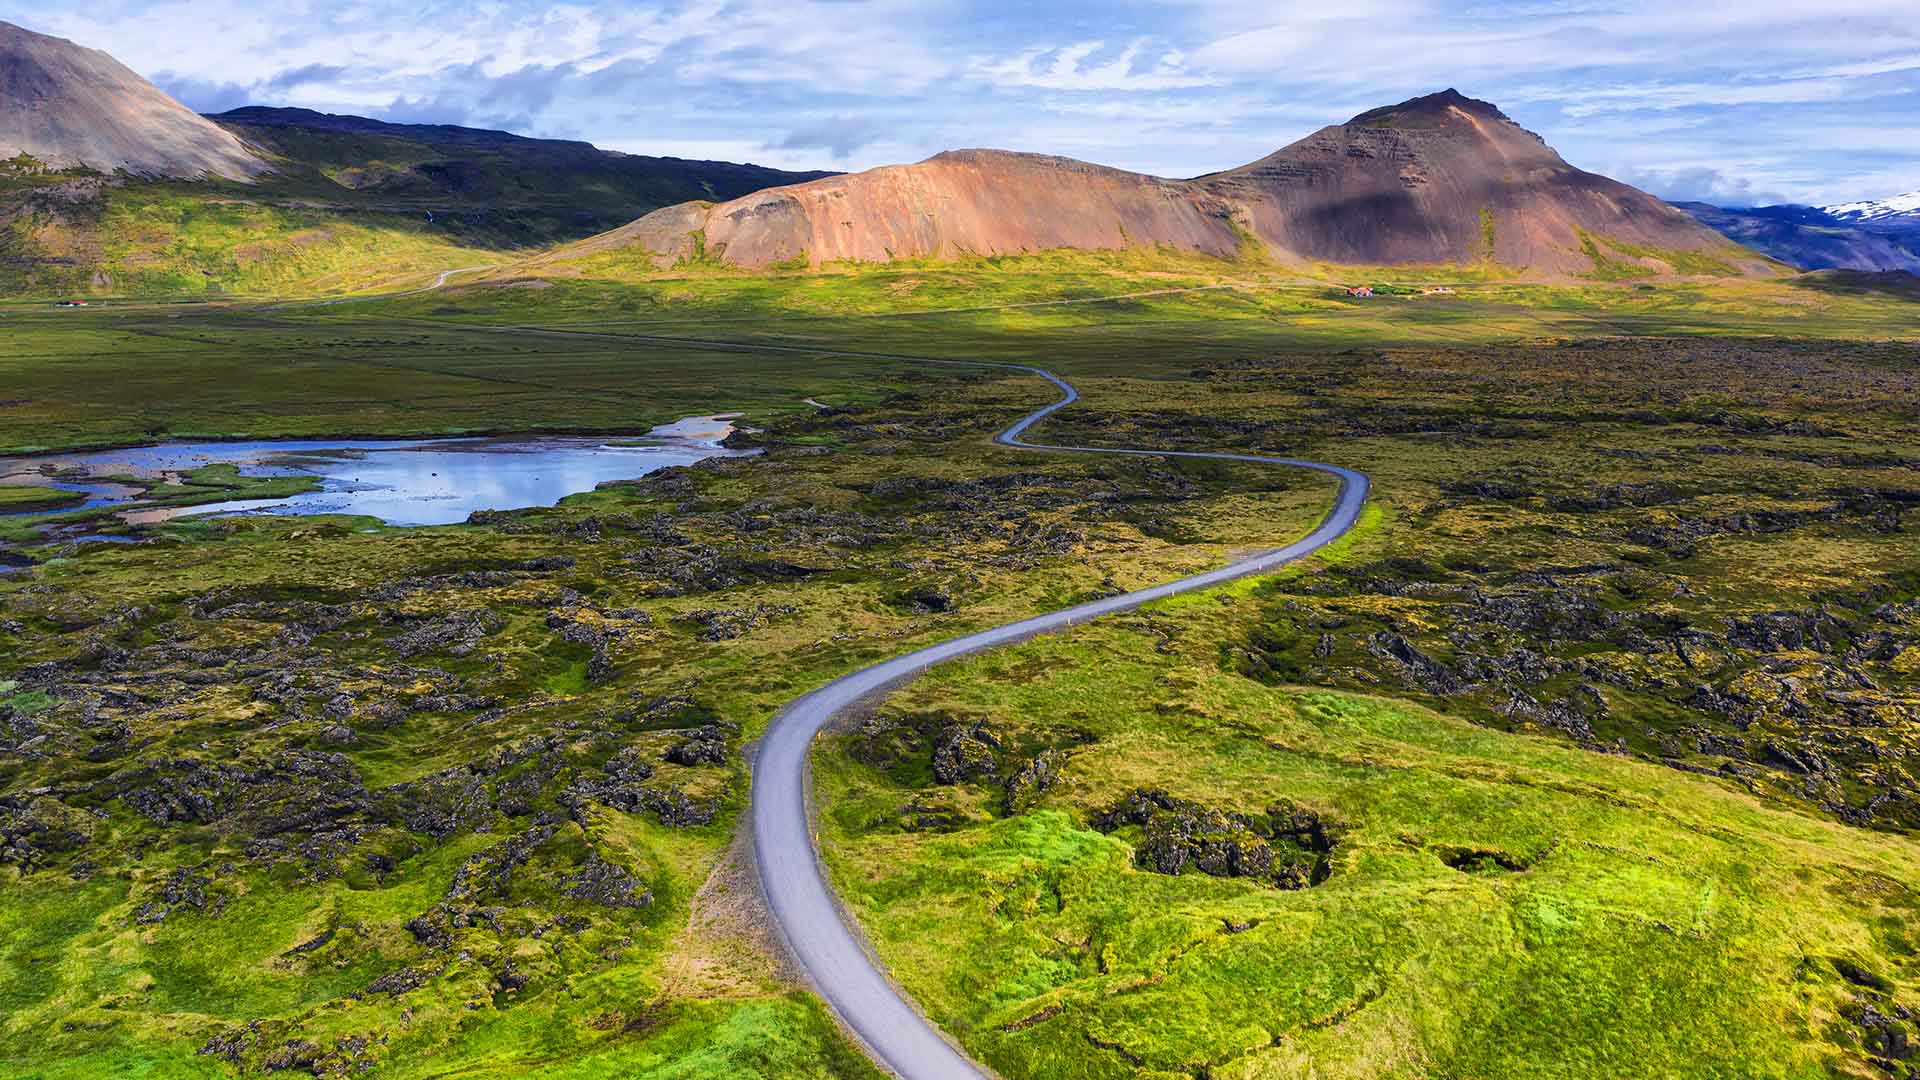 Road in Iceland